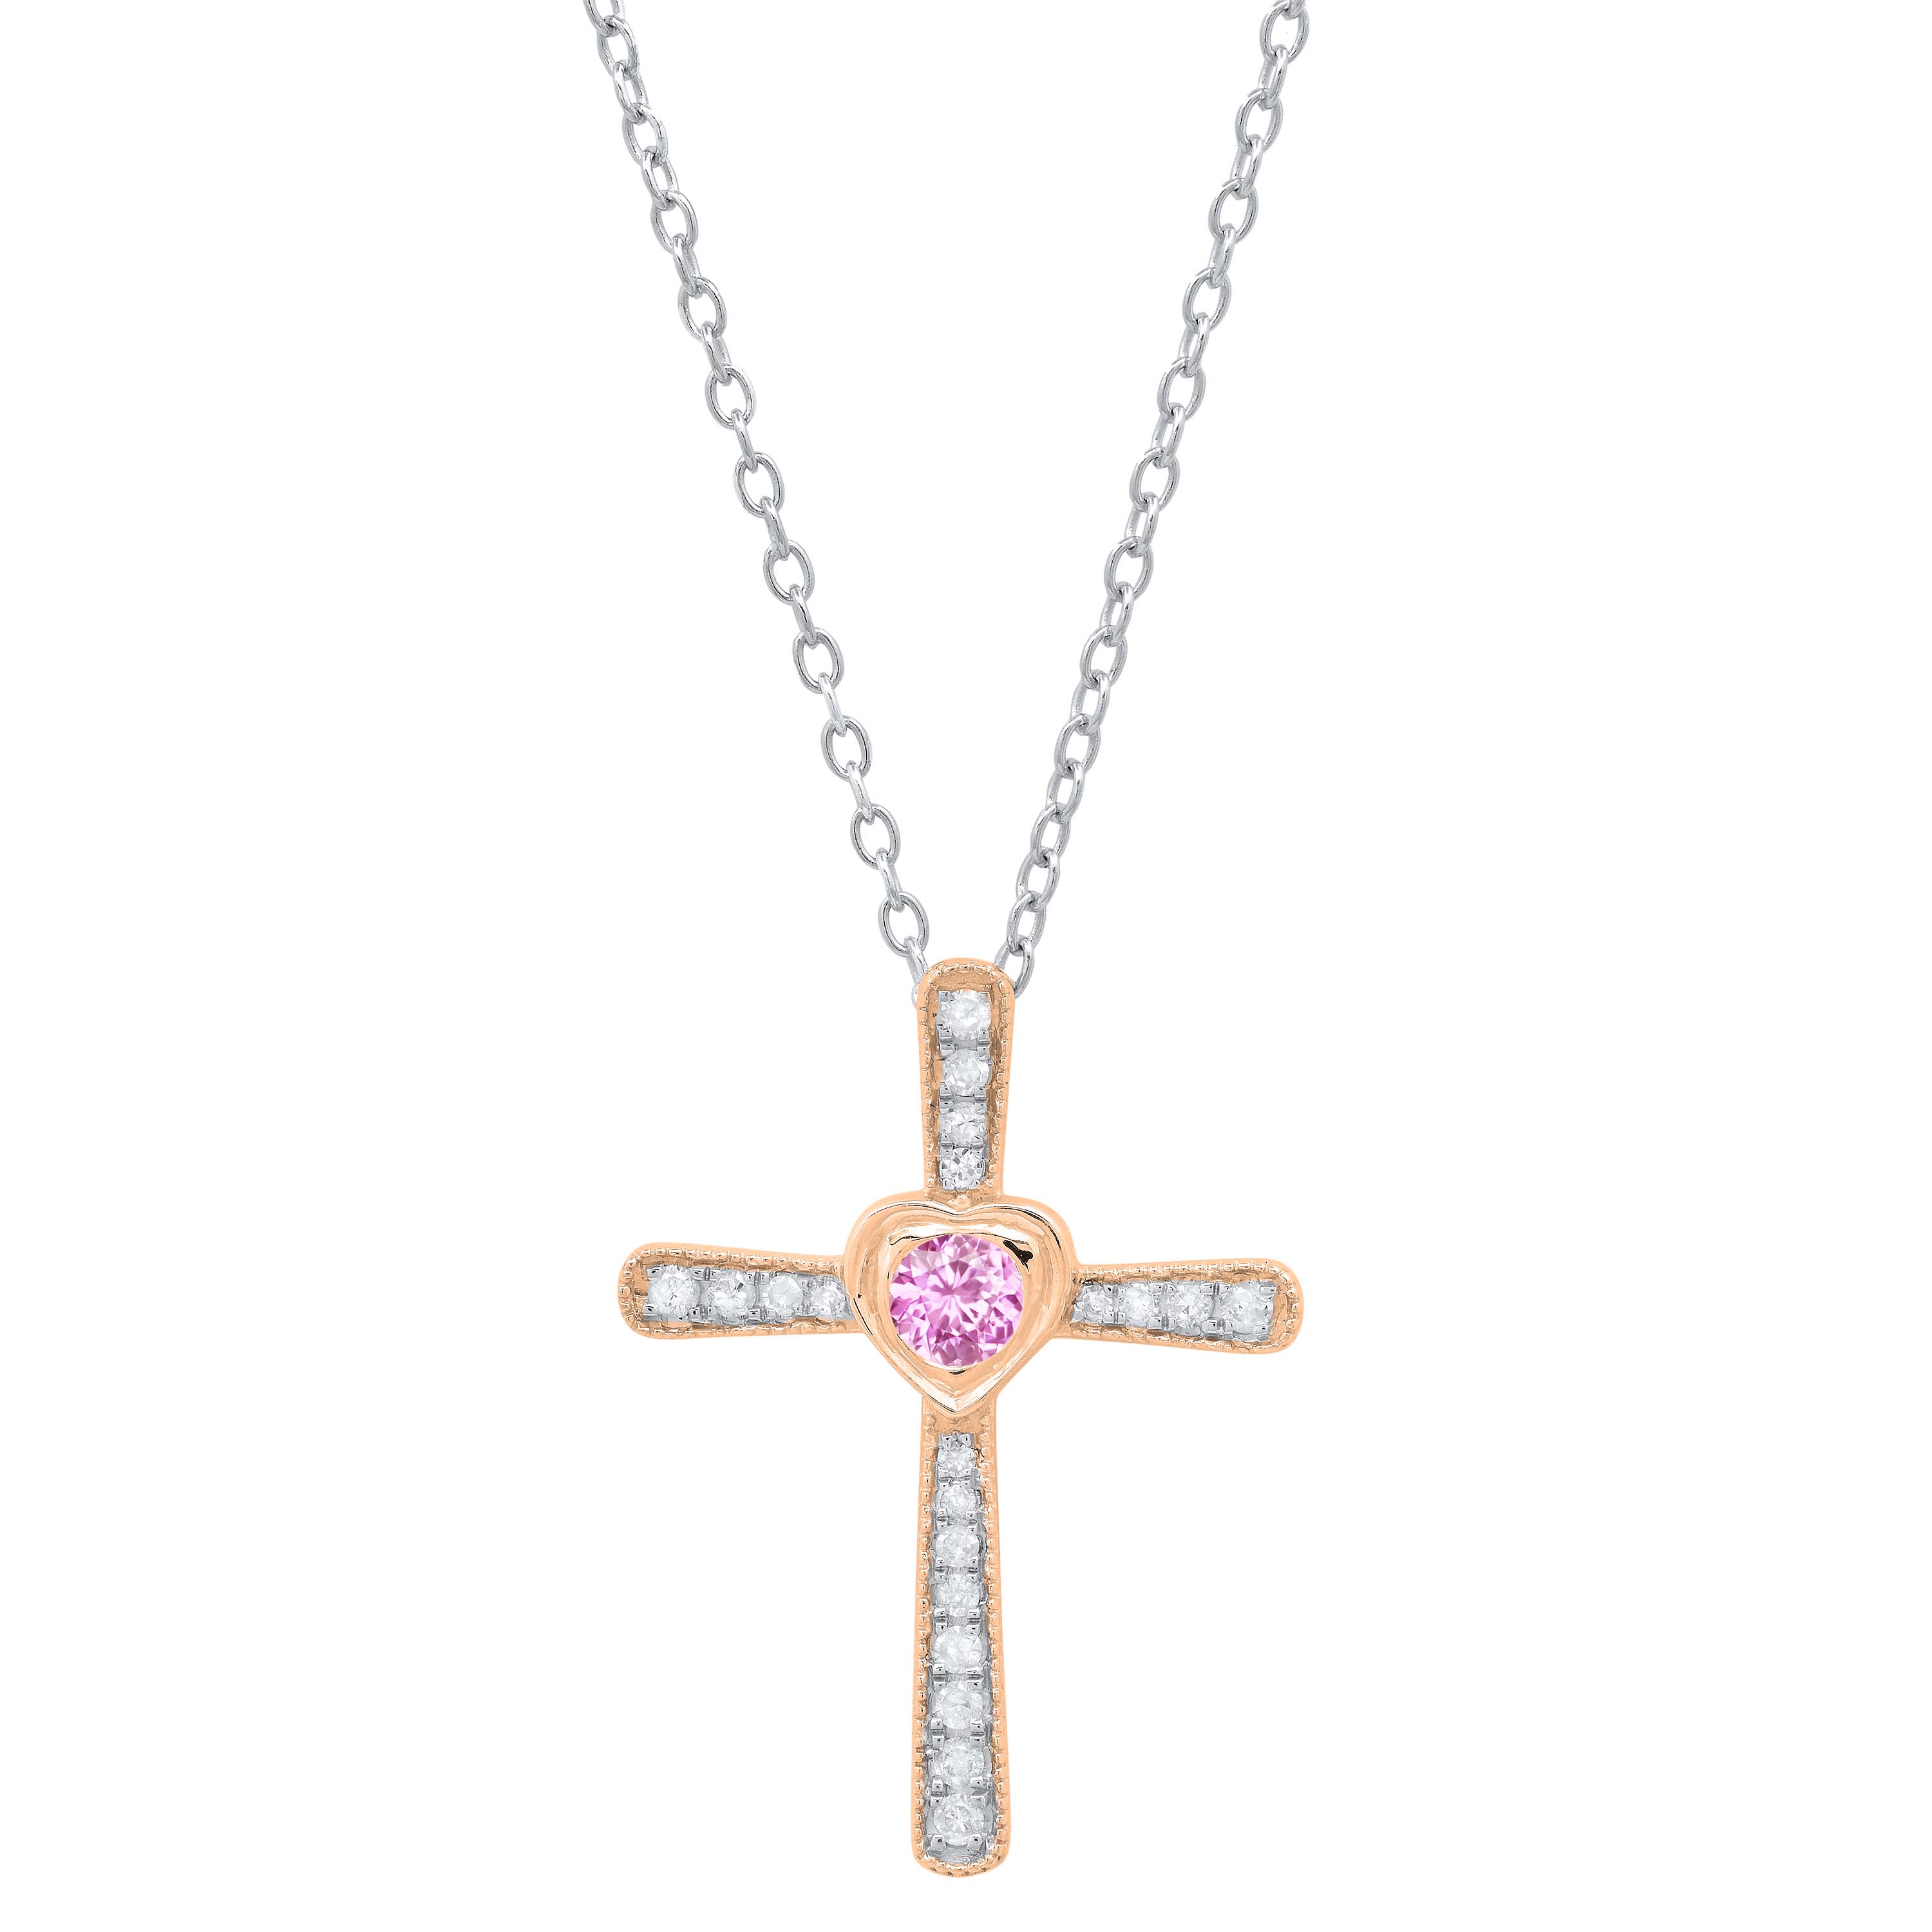 Buy Our Latest Collection Of Pink Sapphire Pendants in 14k Real Gold